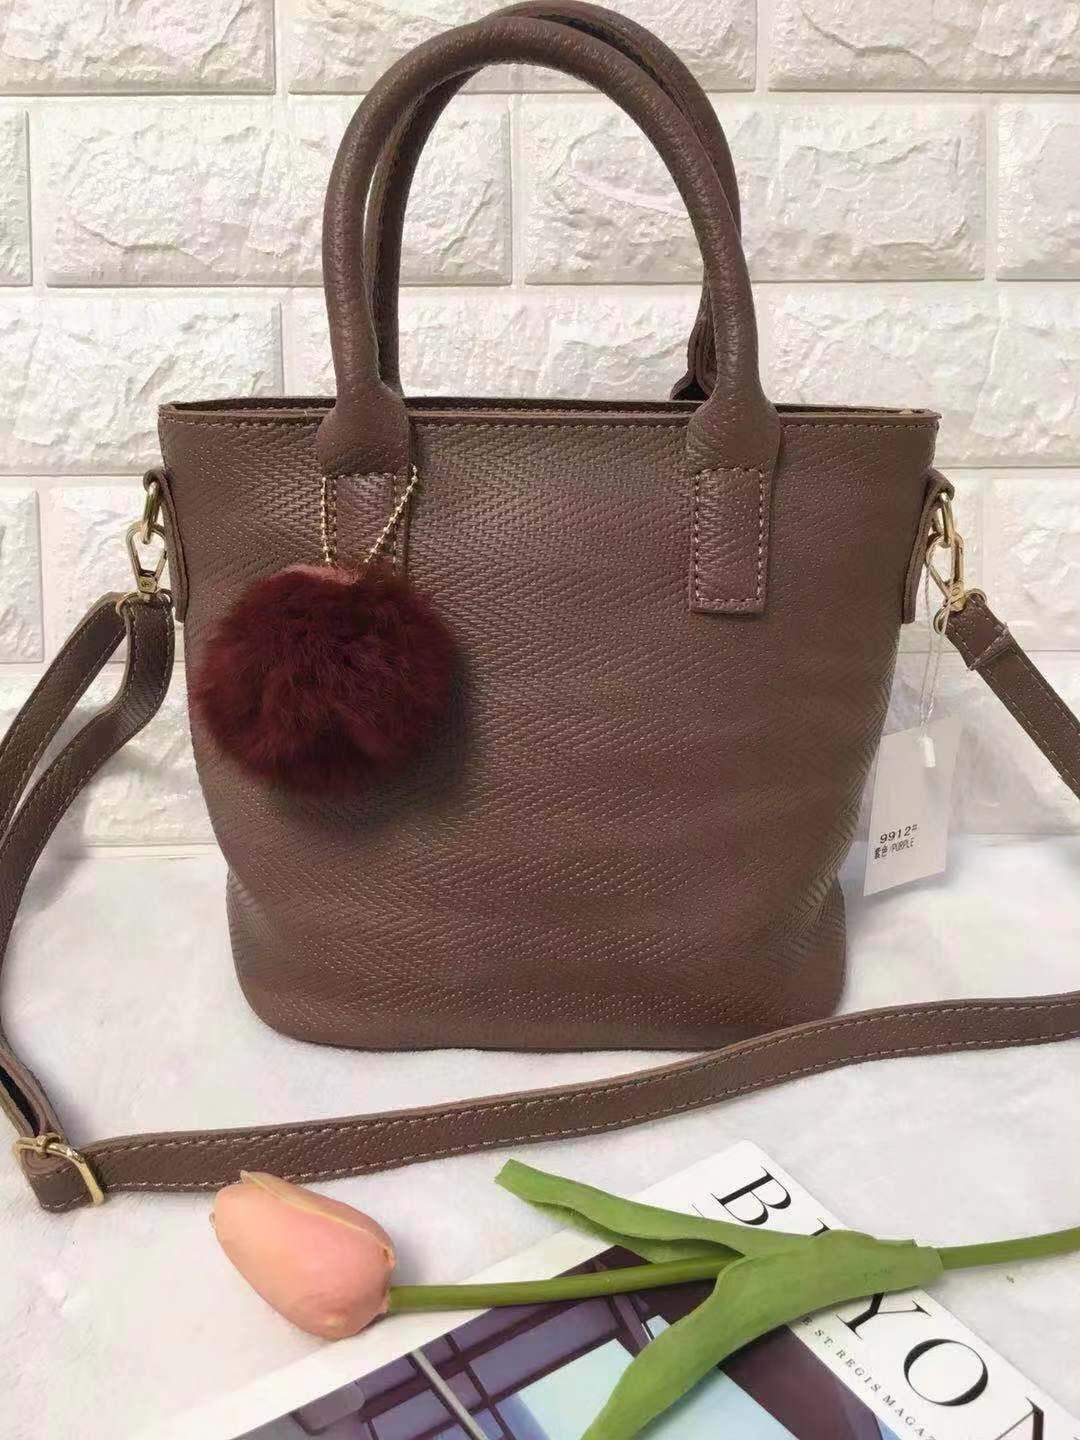 Bags for Women for sale - Womens Bags online brands, prices & reviews in Philippines | www.waldenwongart.com